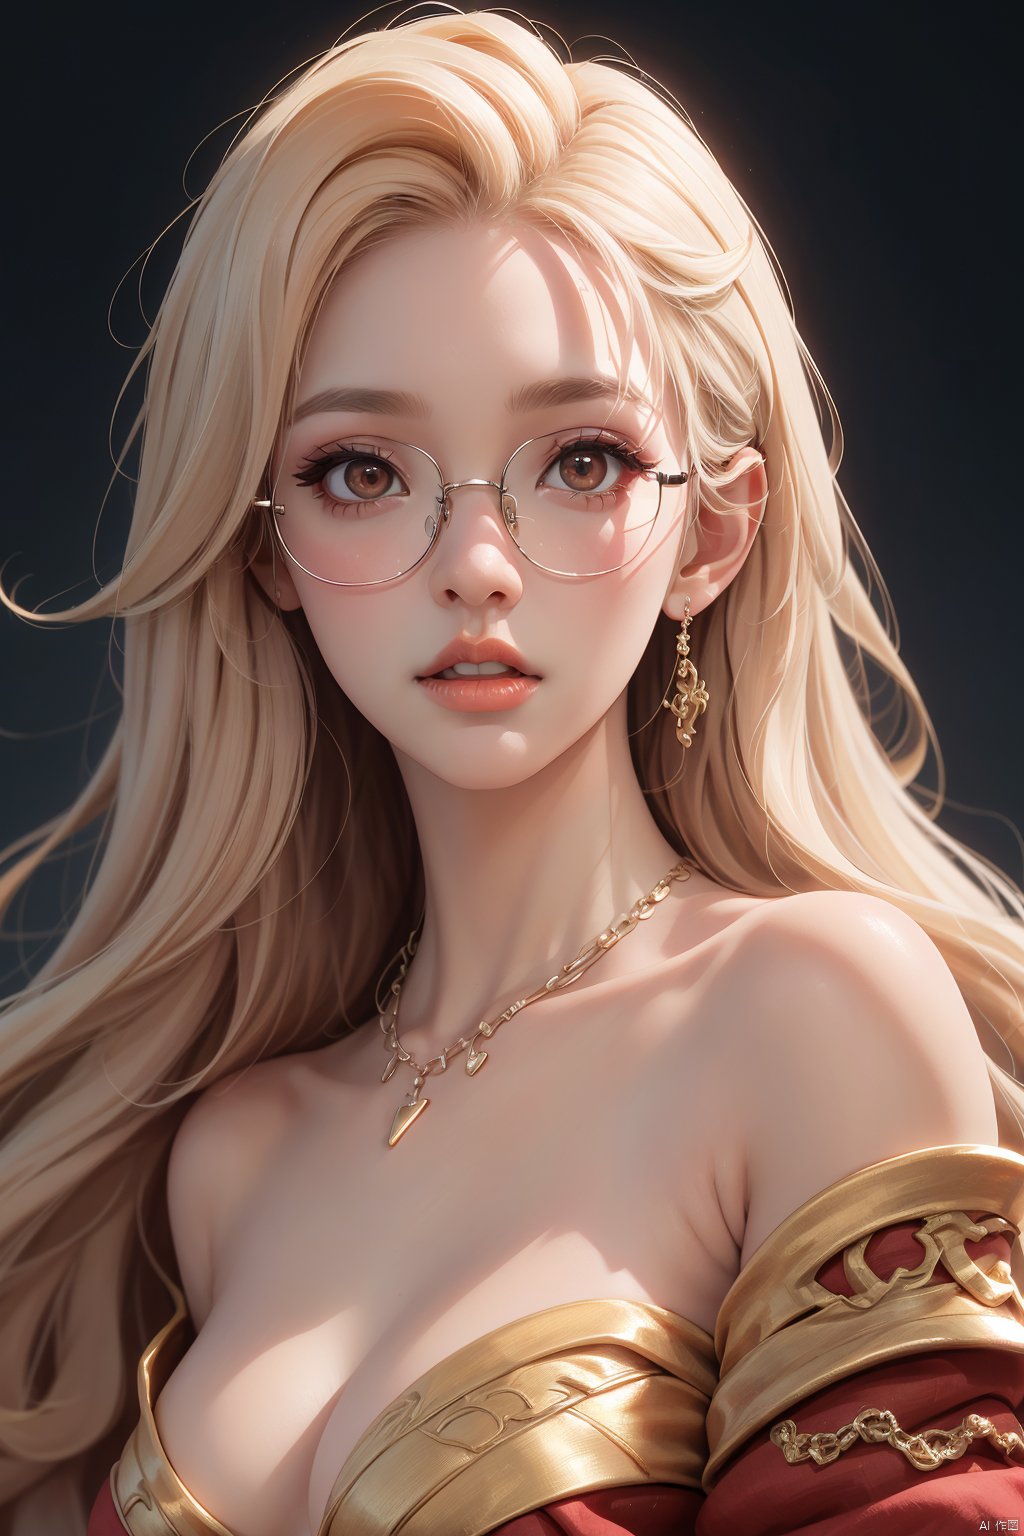  A girl, long white hair, flowing hair, bust, close-up of face, bust, fair skin, necklace, masonry, gem, ear chain, clavicle, off-the-shoulder, exquisite facial features and makeup.Red lips and delicate eye makeup.Delicate hair,Glasses, glasses,Wearing glasses,
( Best Quality: 1.2 ), ( Ultra HD: 1.2 ), ( Ultra-High Resolution: 1.2 ), ( CG Rendering: 1.2 ), Wallpaper, Masterpiece, ( 36K HD: 1.2 ), ( Extra Detail: 1.1 ), Ultra Realistic, ( Detail Realistic Skin Texture: 1.2 ), ( White Skin: 1.2 ), Focus, Realistic Art,liuguang,liuguang,bankuang, (\meng ze\)